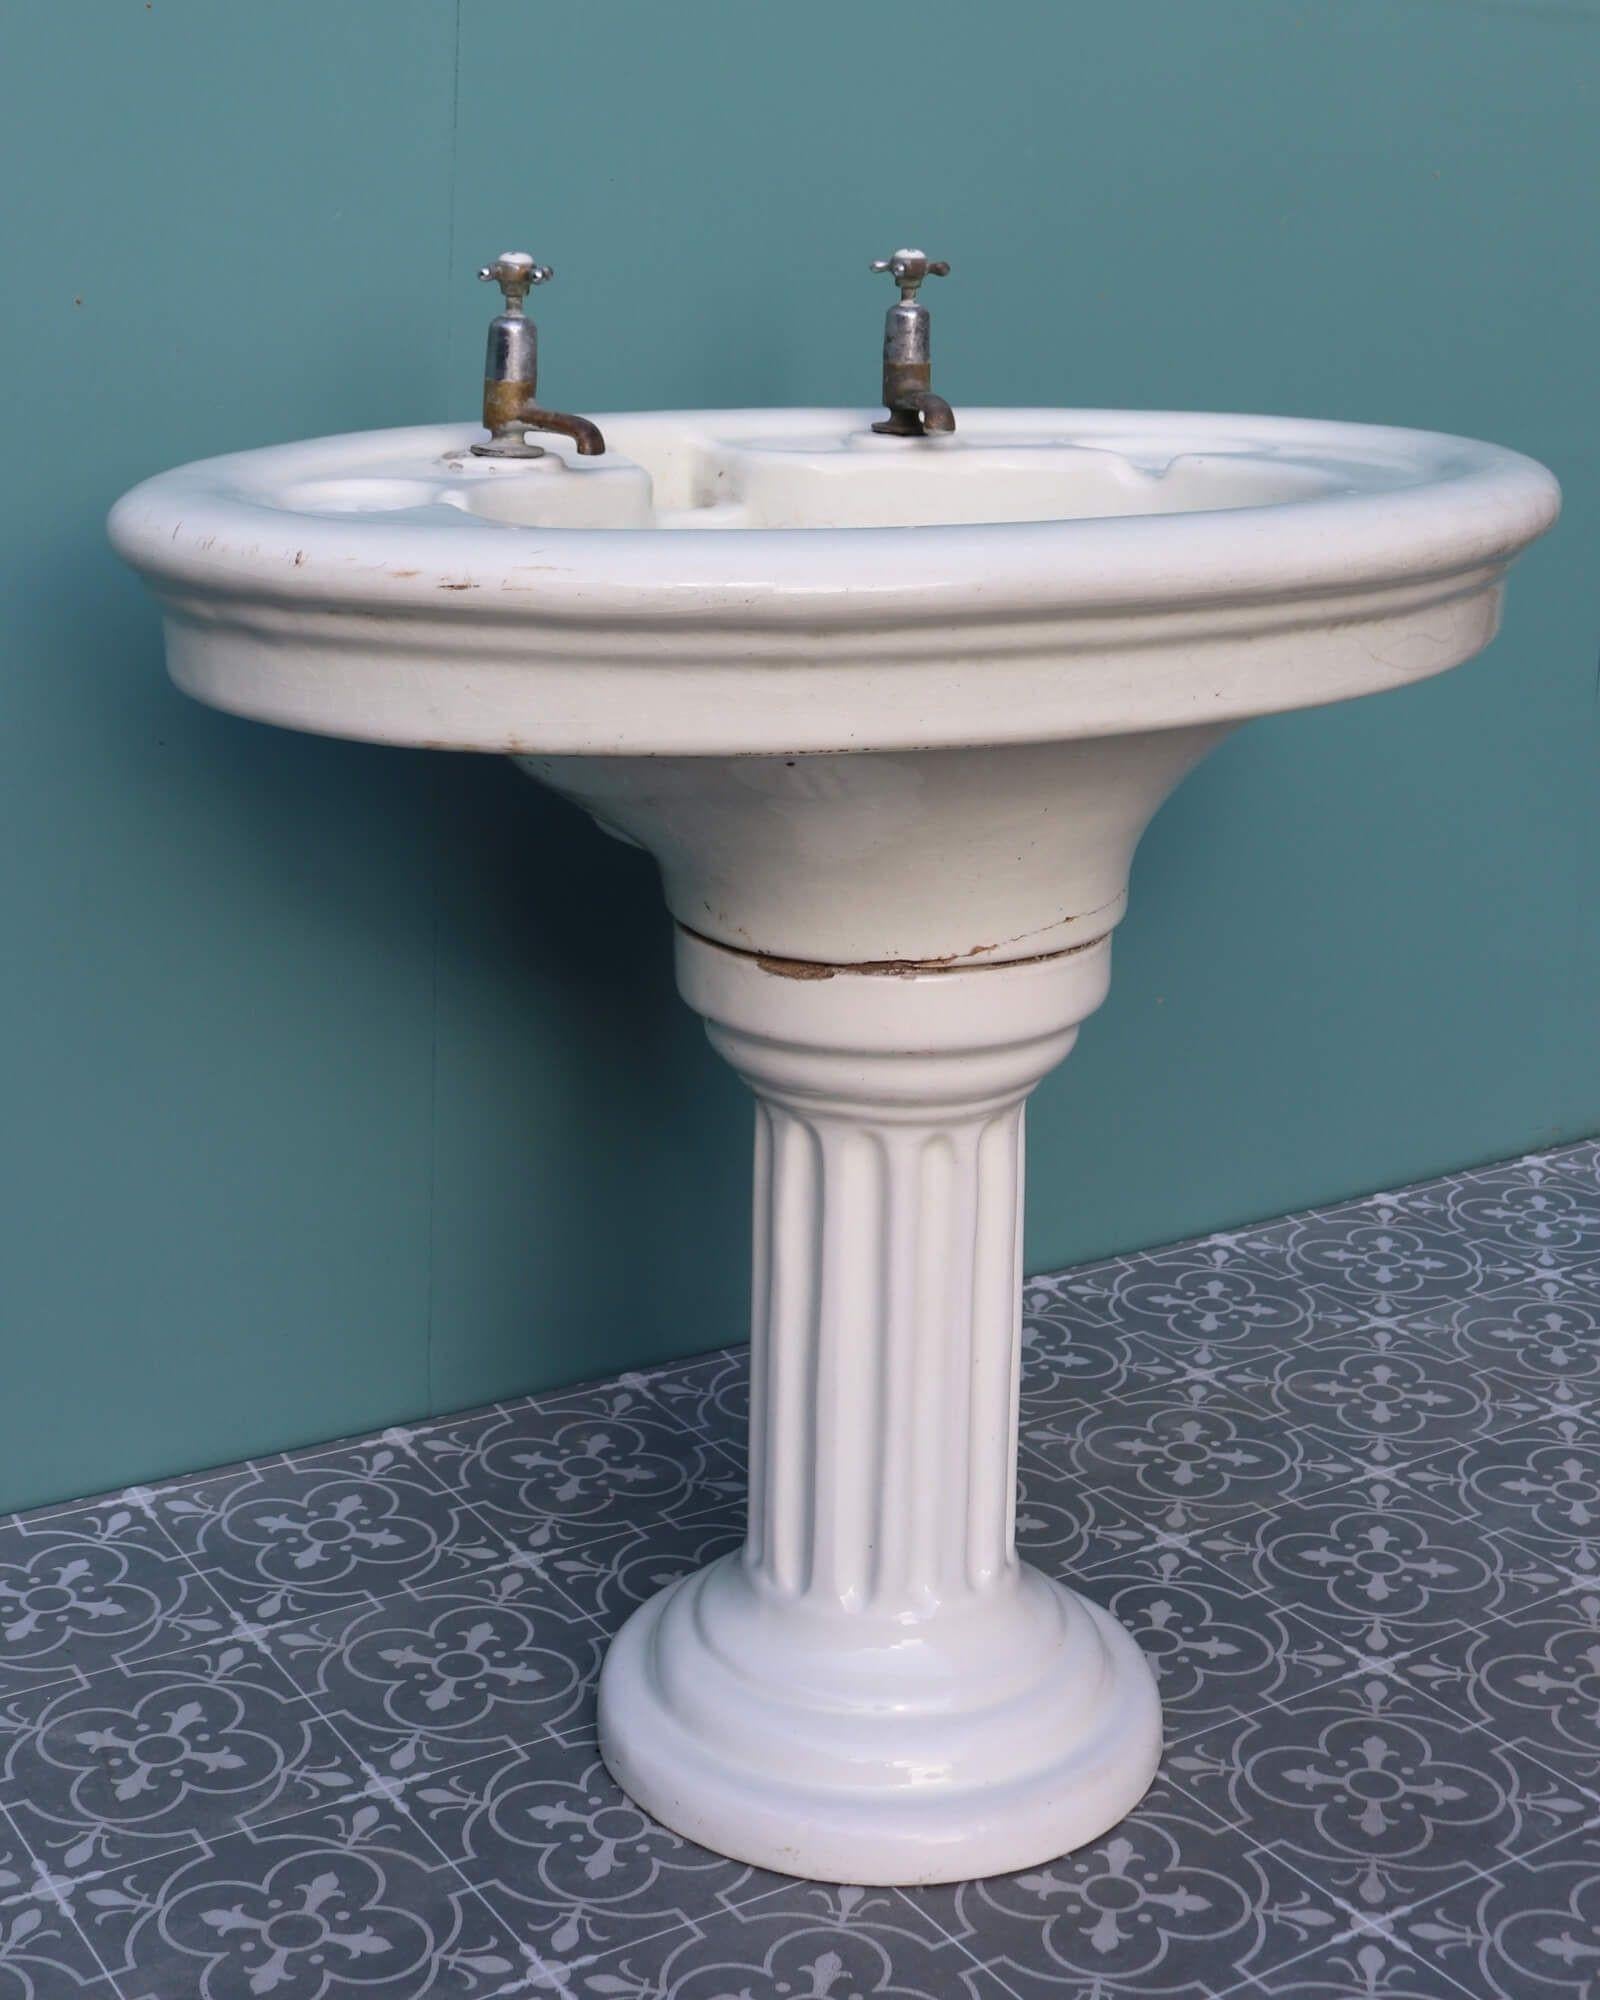 Reclaimed Doulton & Co Antique Pedestal Washstand In Distressed Condition For Sale In Wormelow, Herefordshire